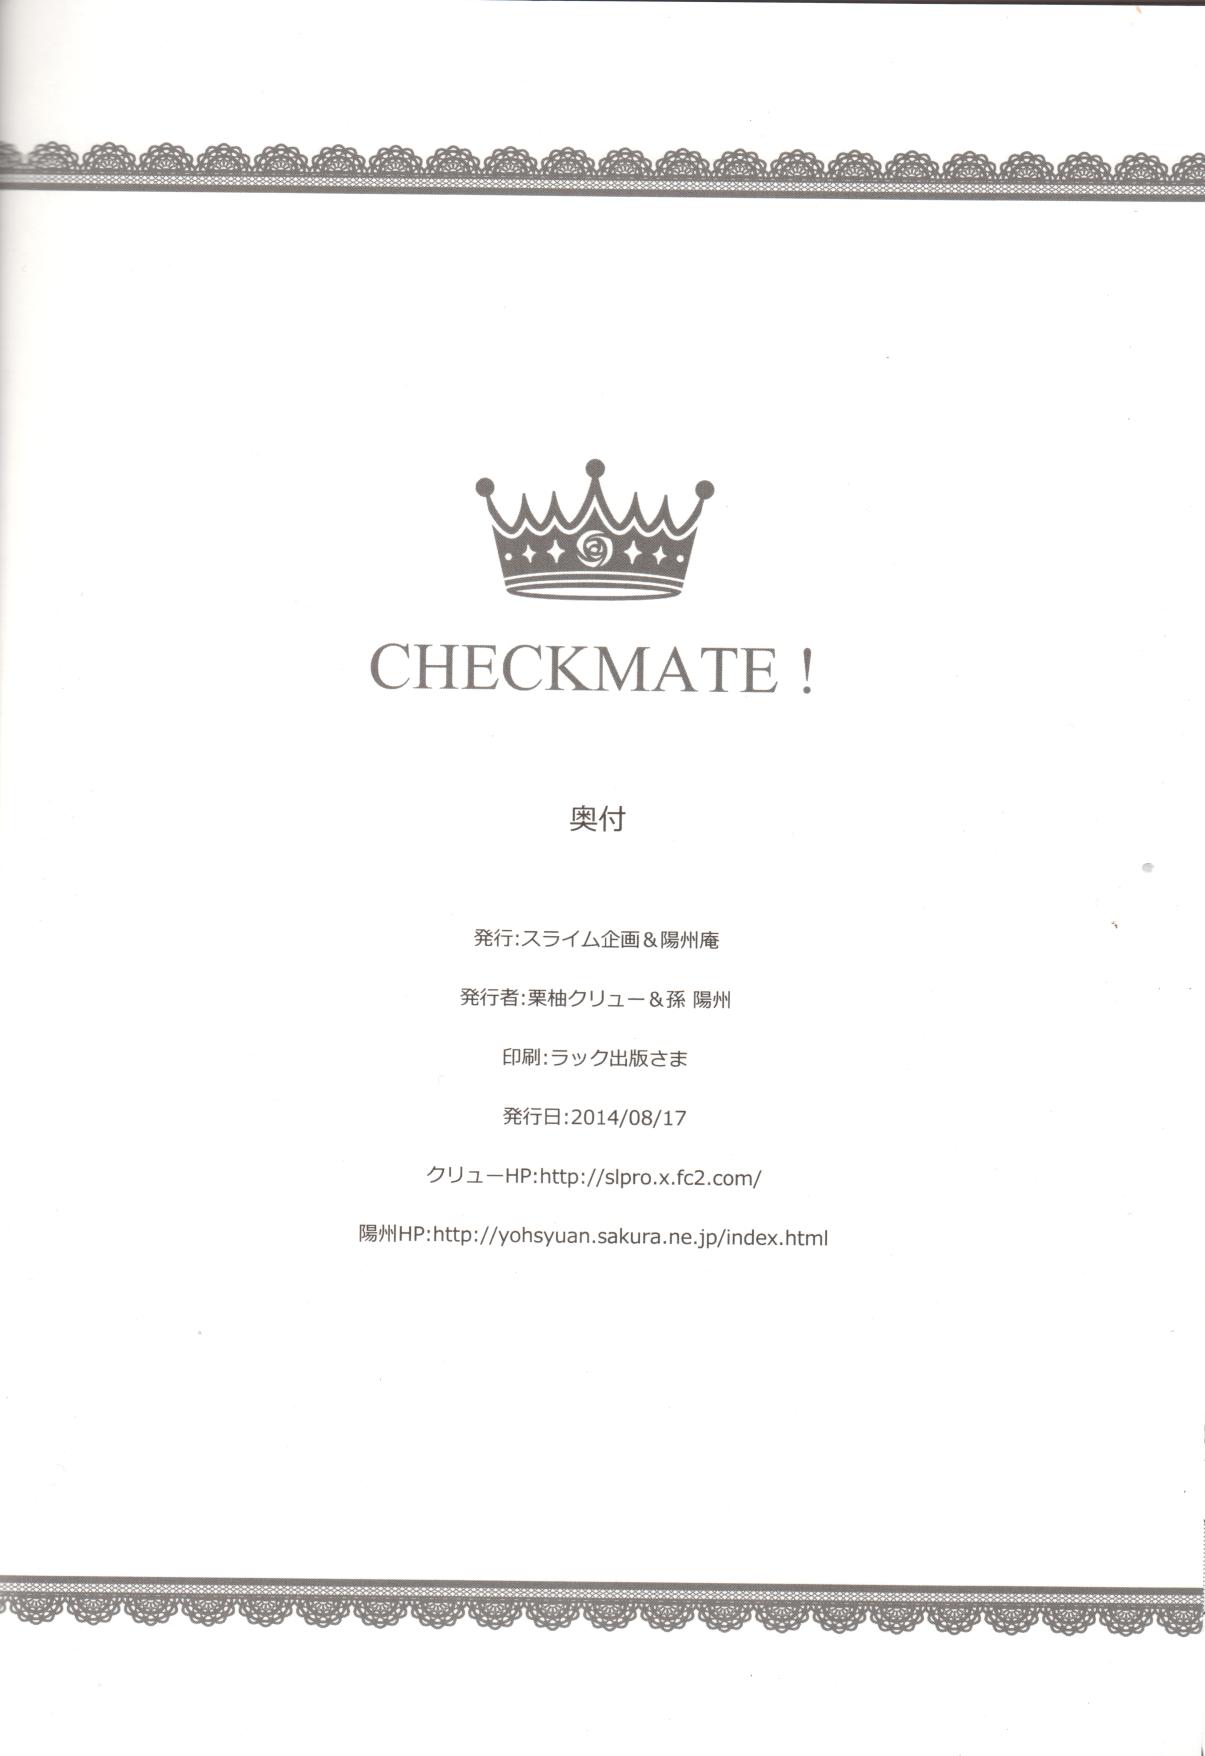 Classic CHECKMATE! - No game no life Missionary Position Porn - Page 25